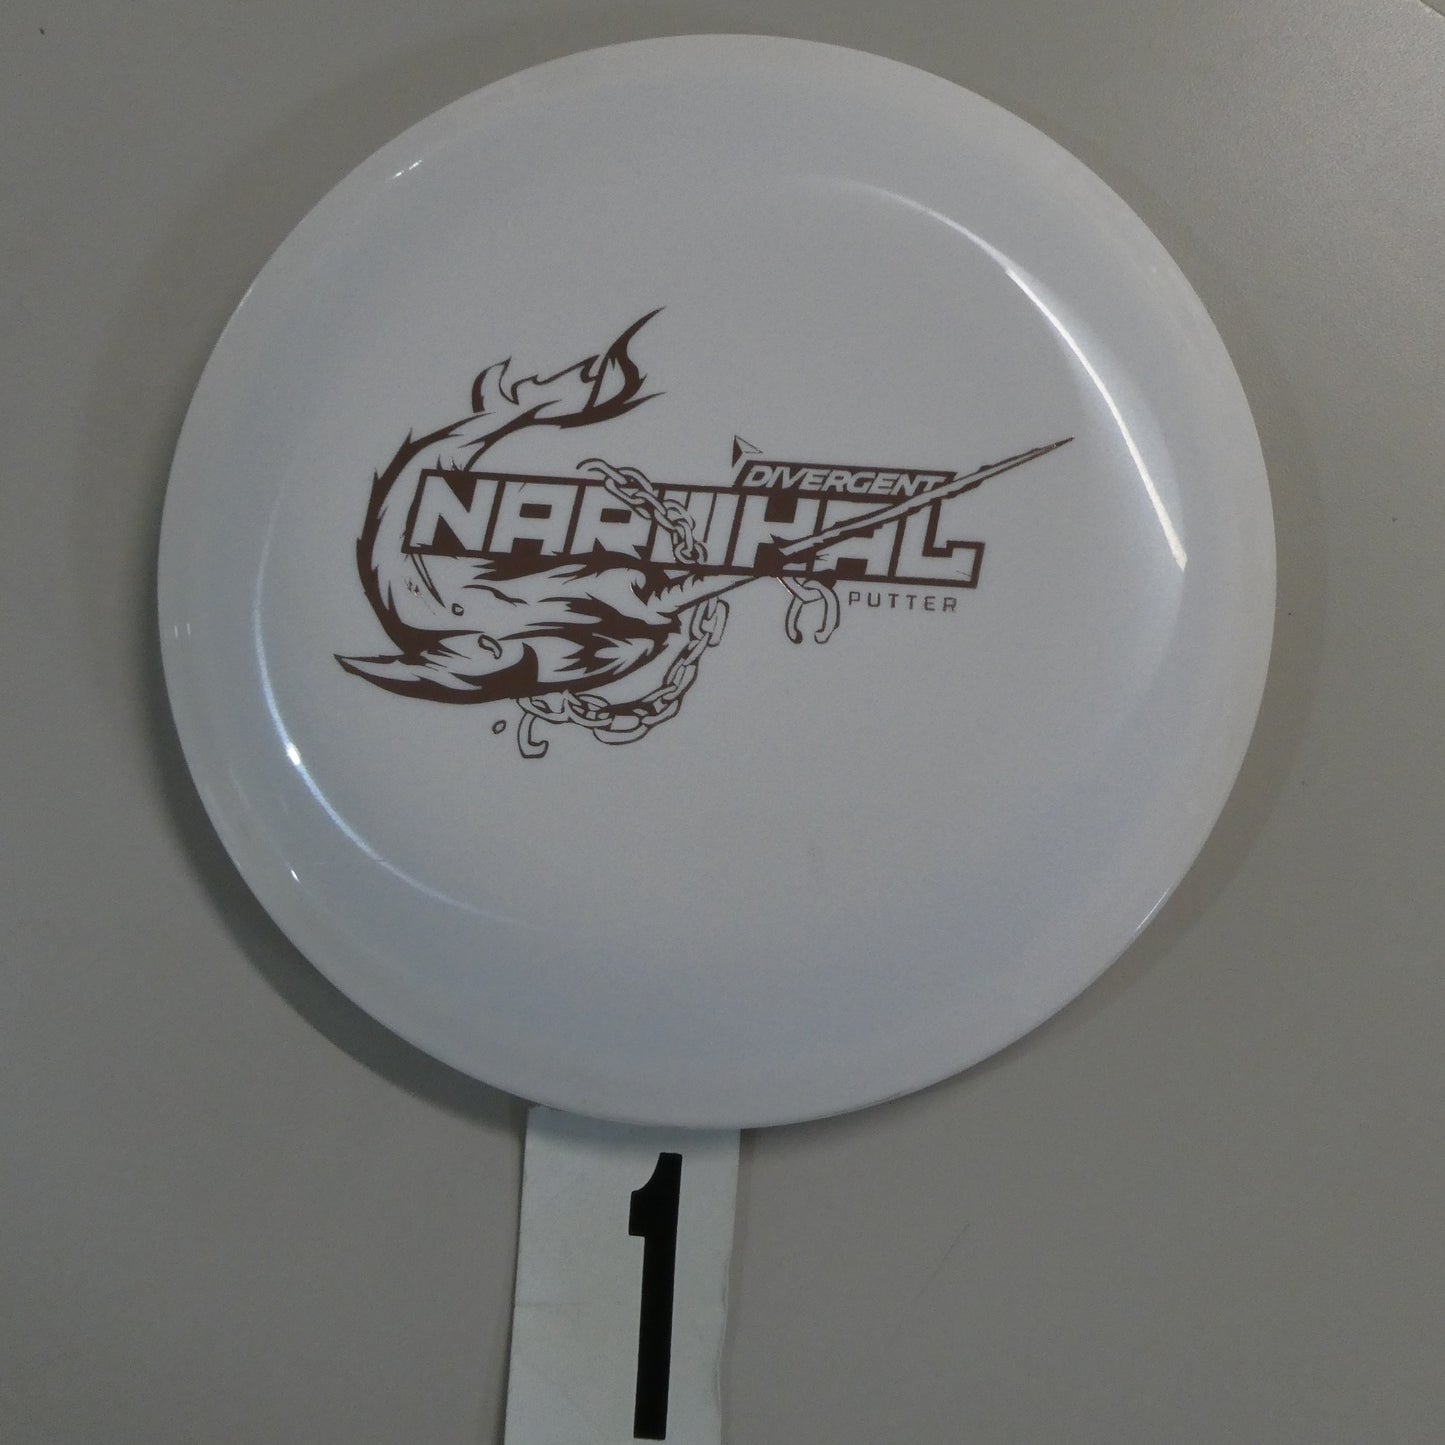 Max Grip Narwhal by Divergent Discs